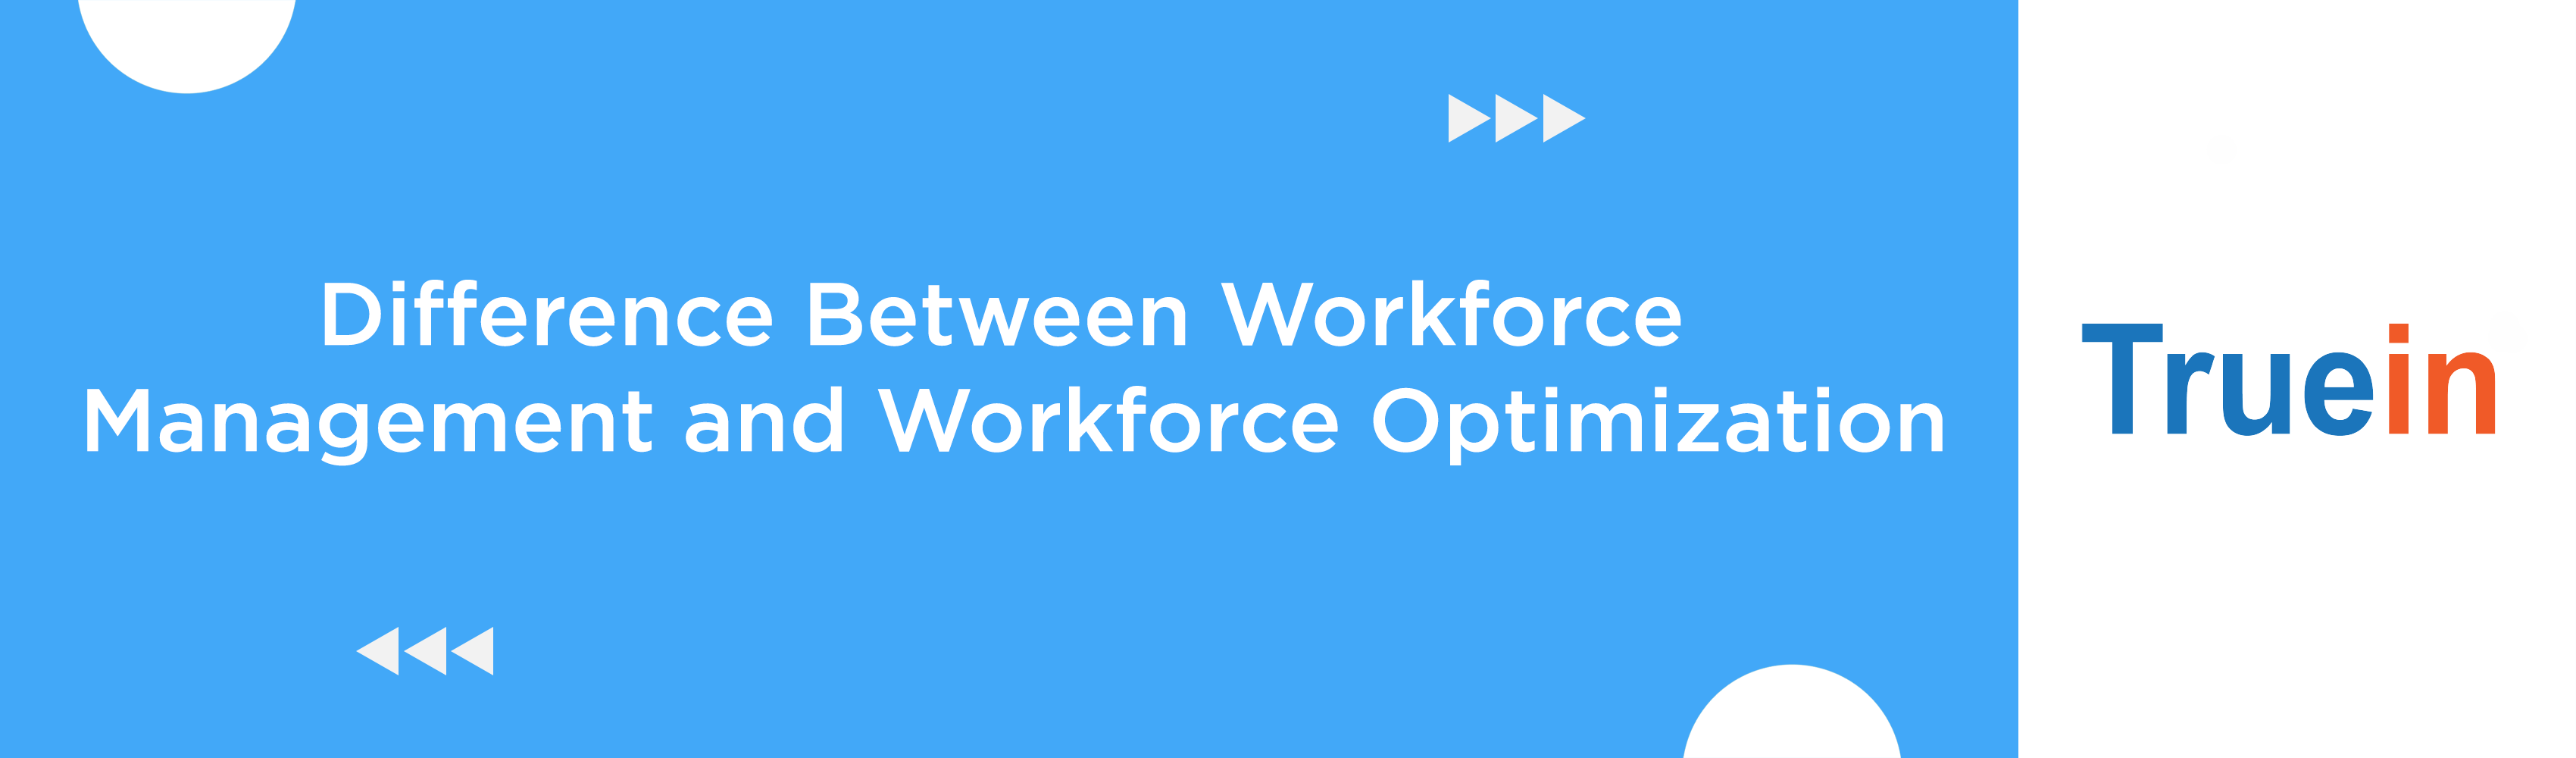 Difference Between Workforce Management and Workforce Optimization